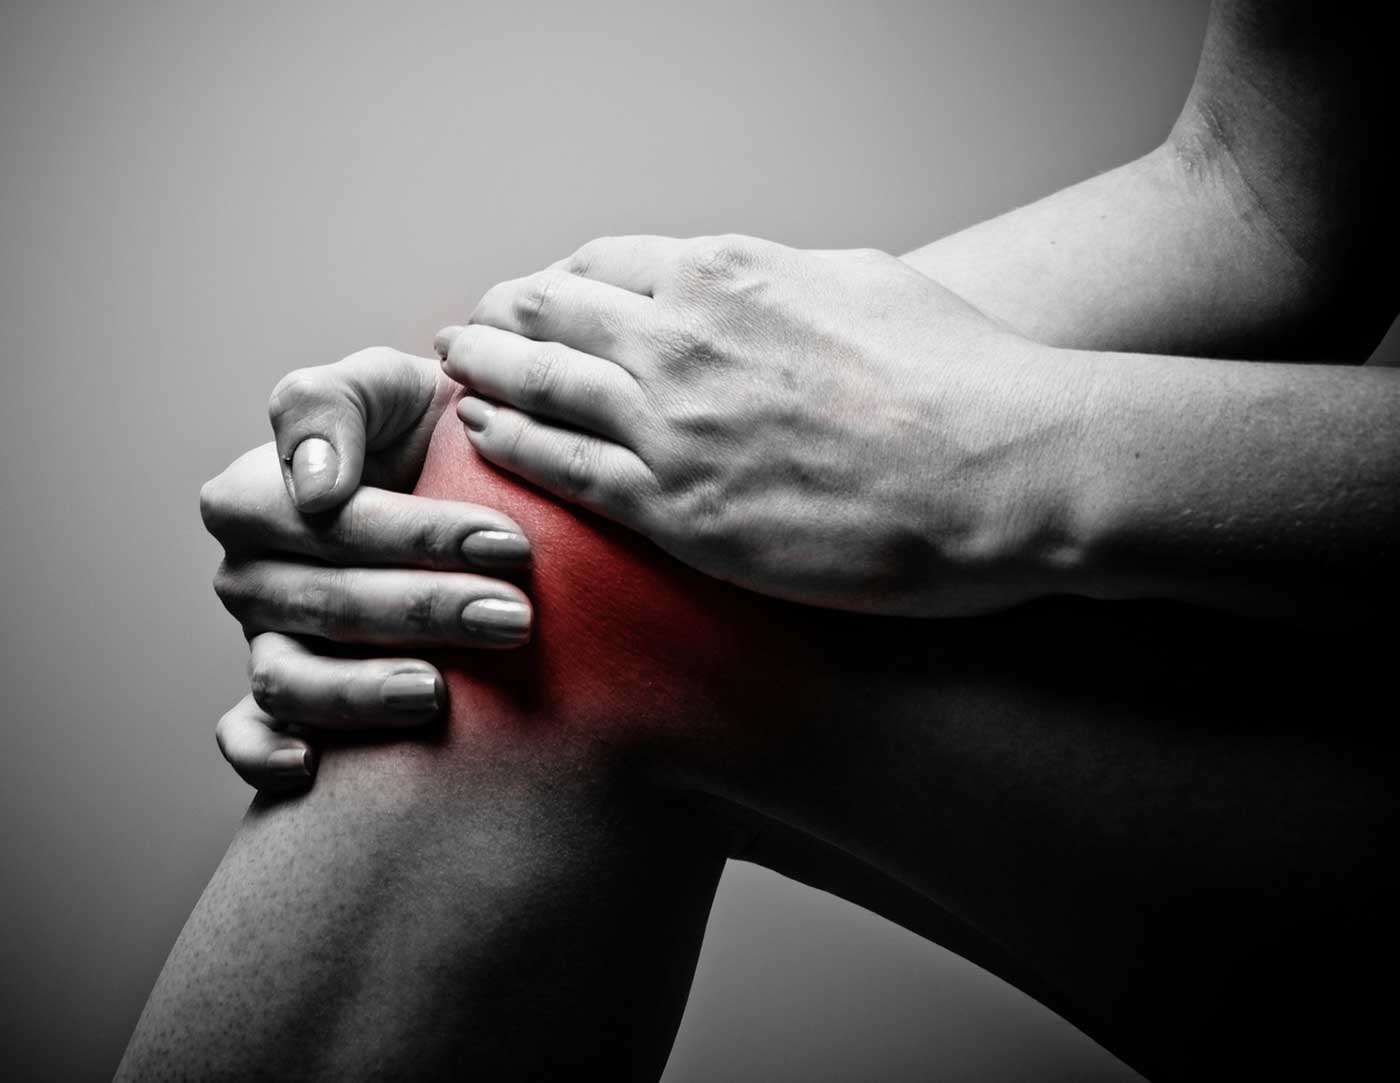 Knee Pain Can Be Treated With Chiropractic